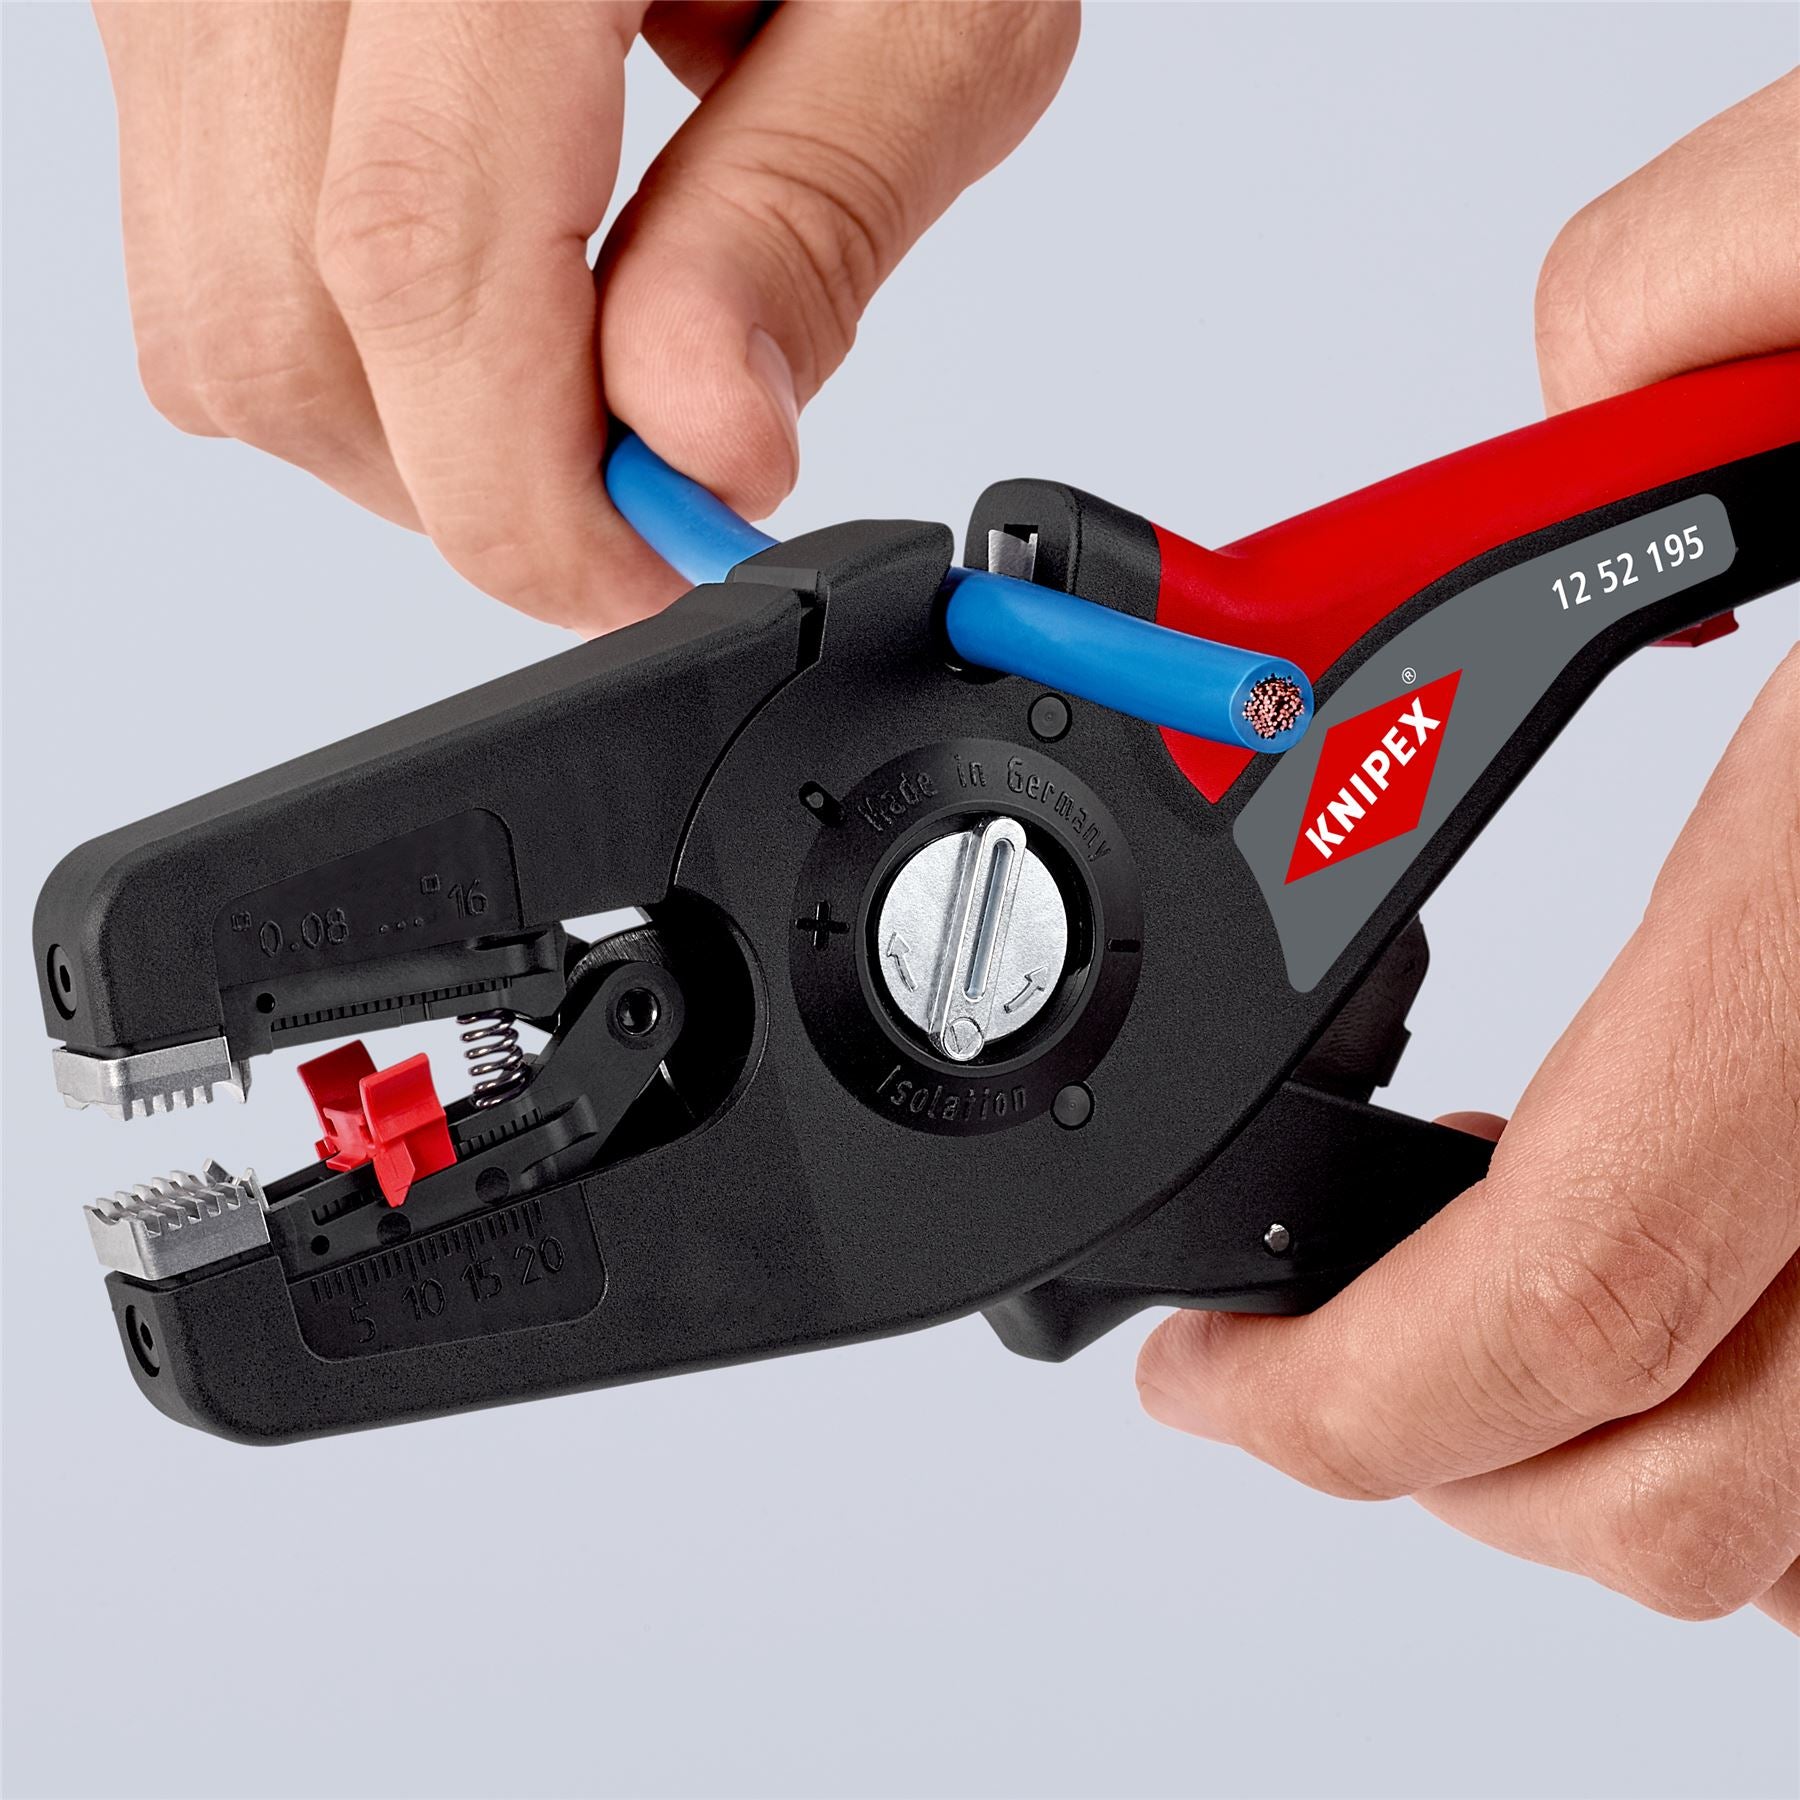 Knipex PreciStrip 16 Automatic Insulation Stripper 195mm Wire Stripping Pliers 12 52 195